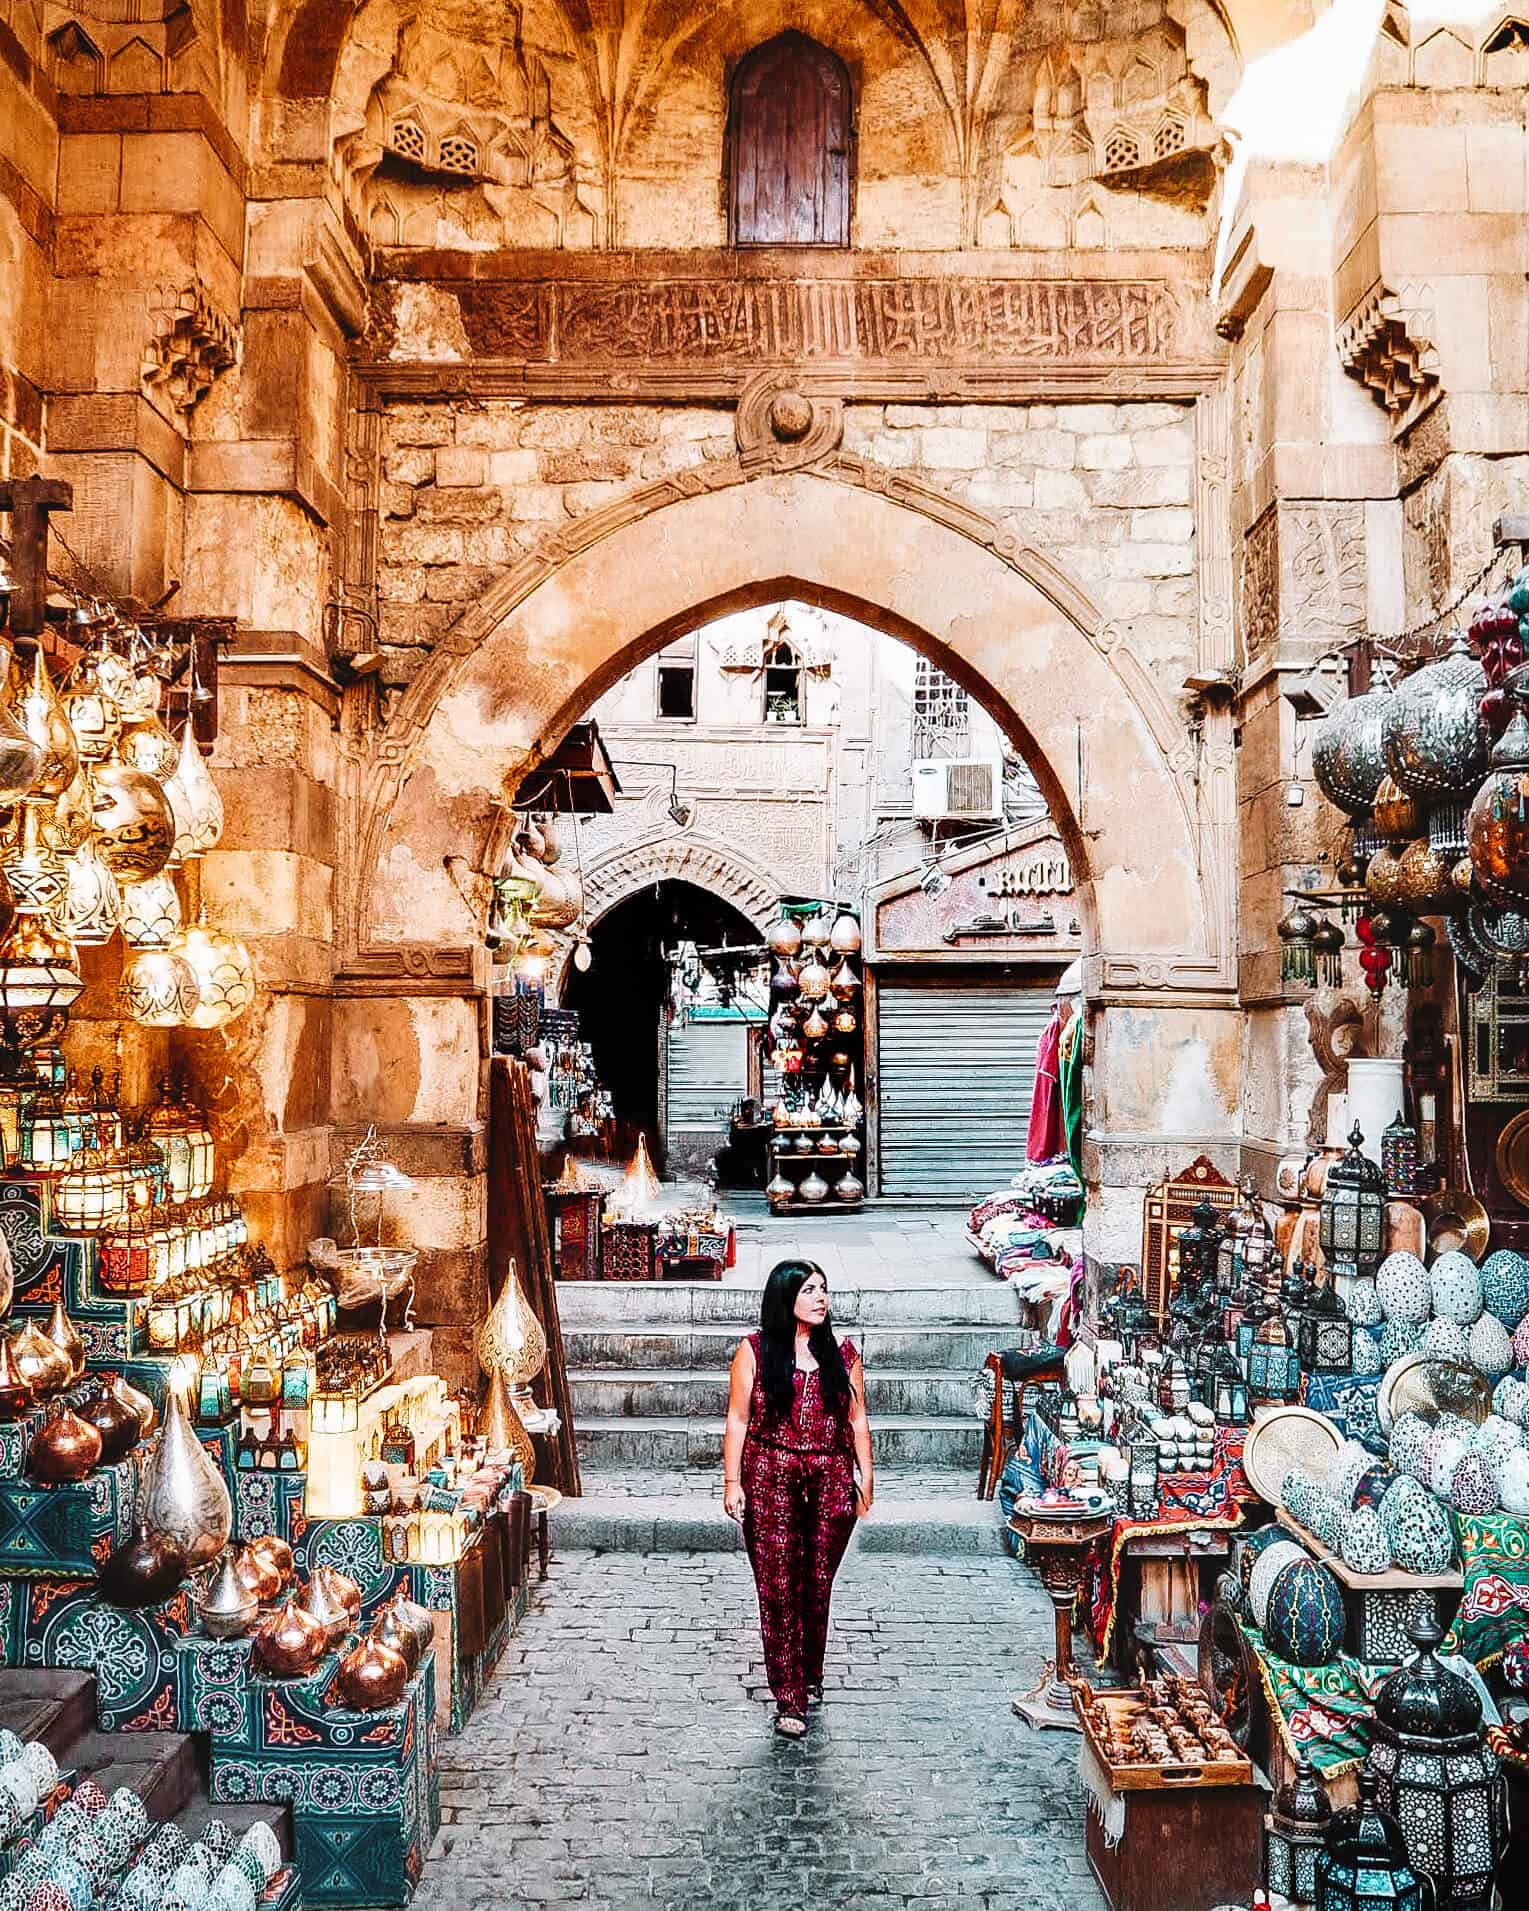 places to visit in cairo